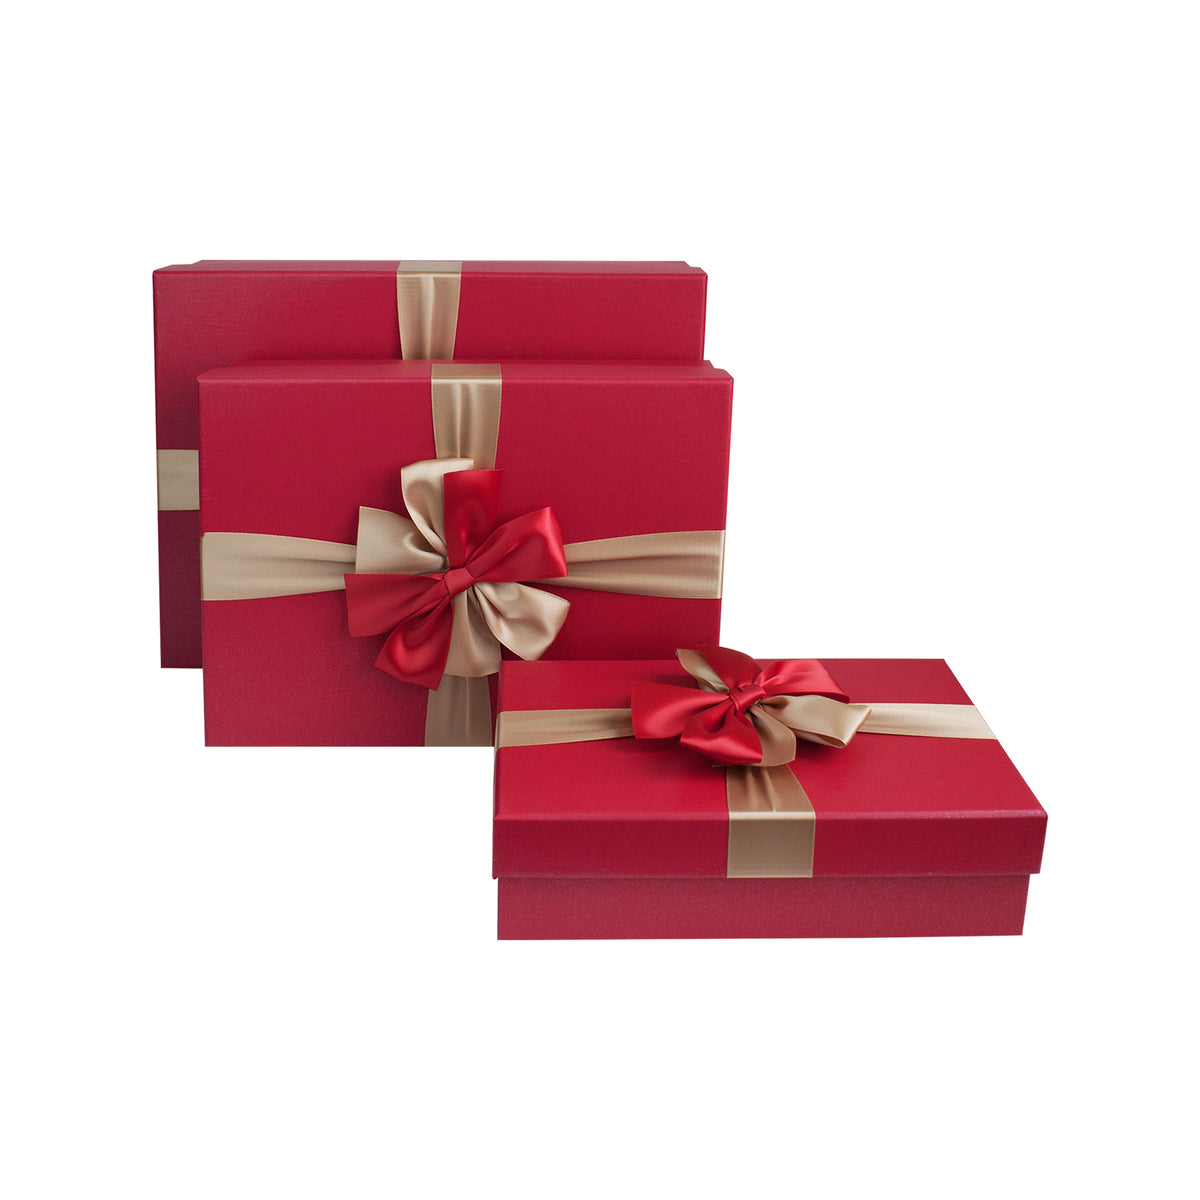 Emartbuy Luxury Red Gift Boxes